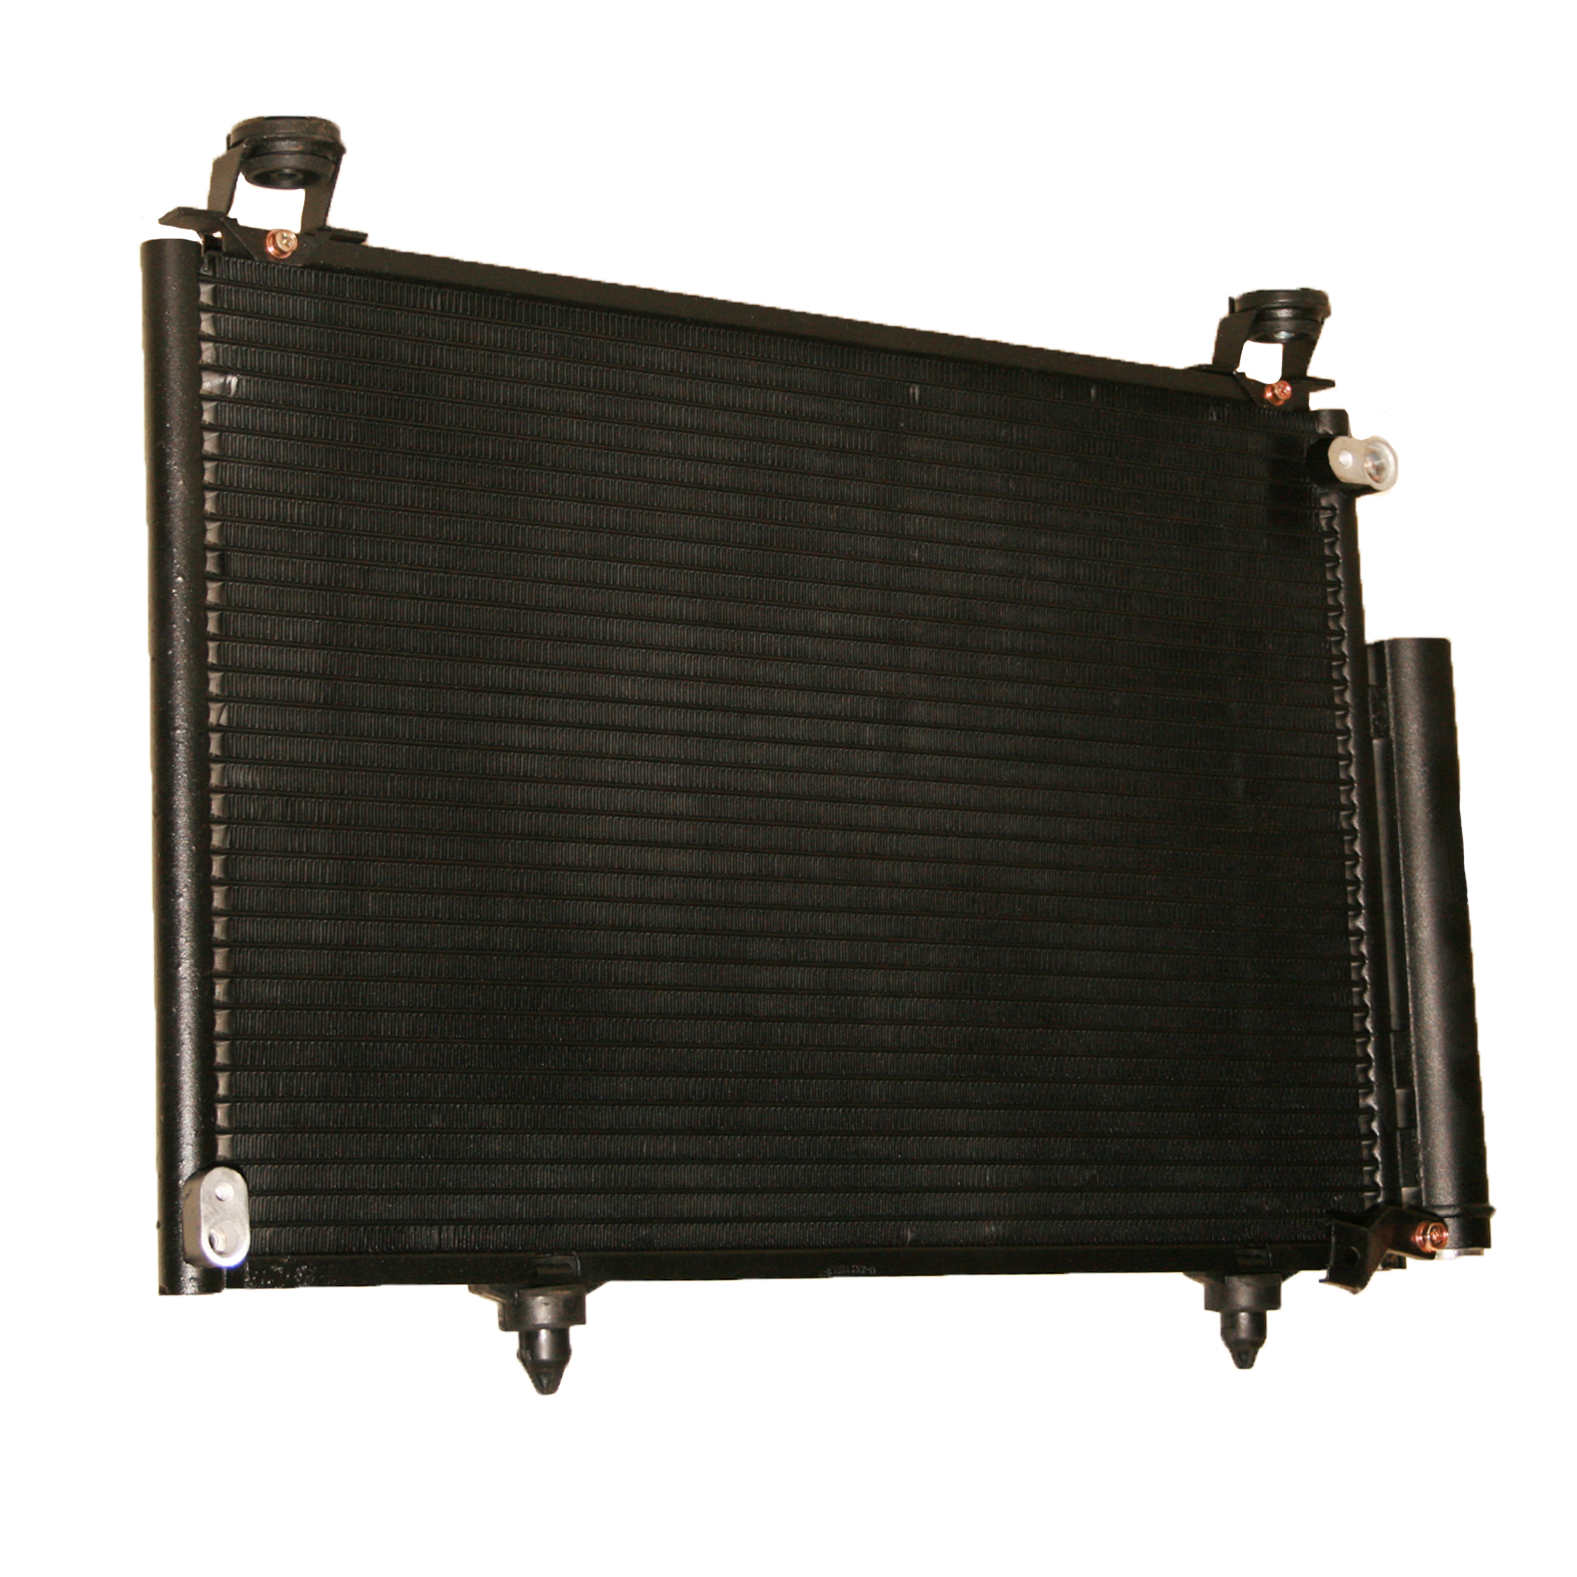 TCW Condenser 44-3300 New Product Image field_60b6a13a6e67c